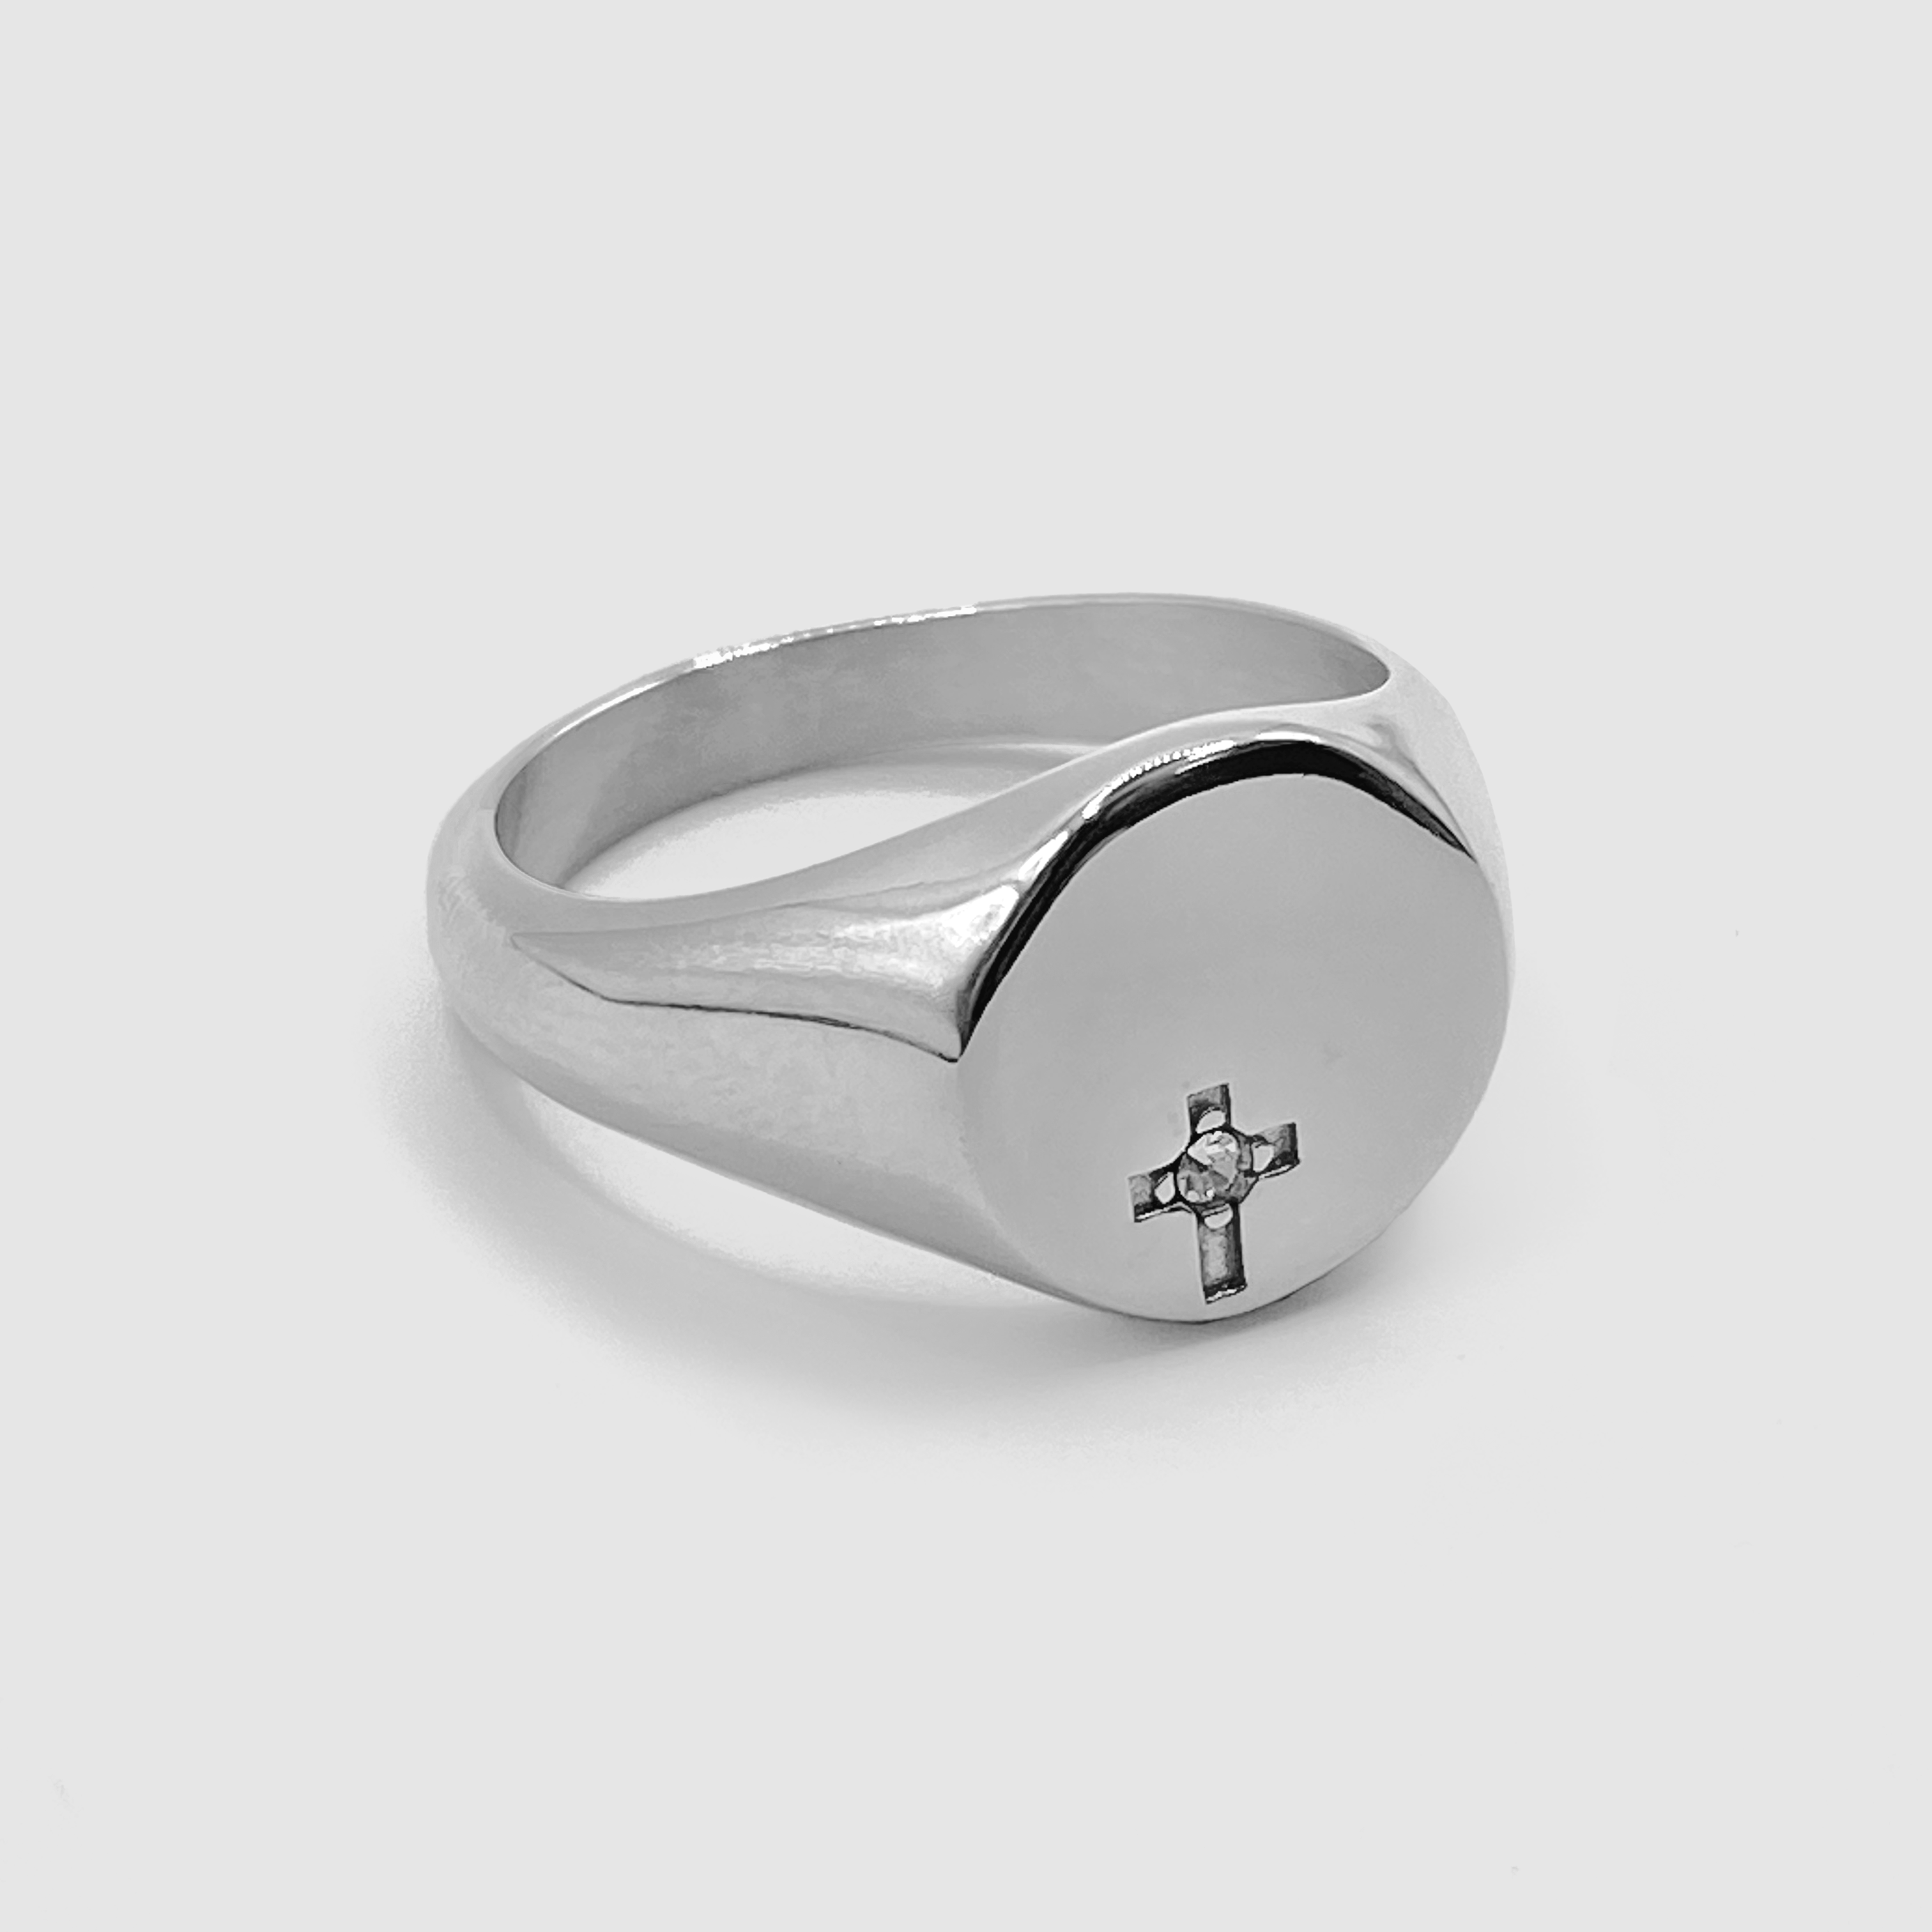 Silver Fate Signet Ring